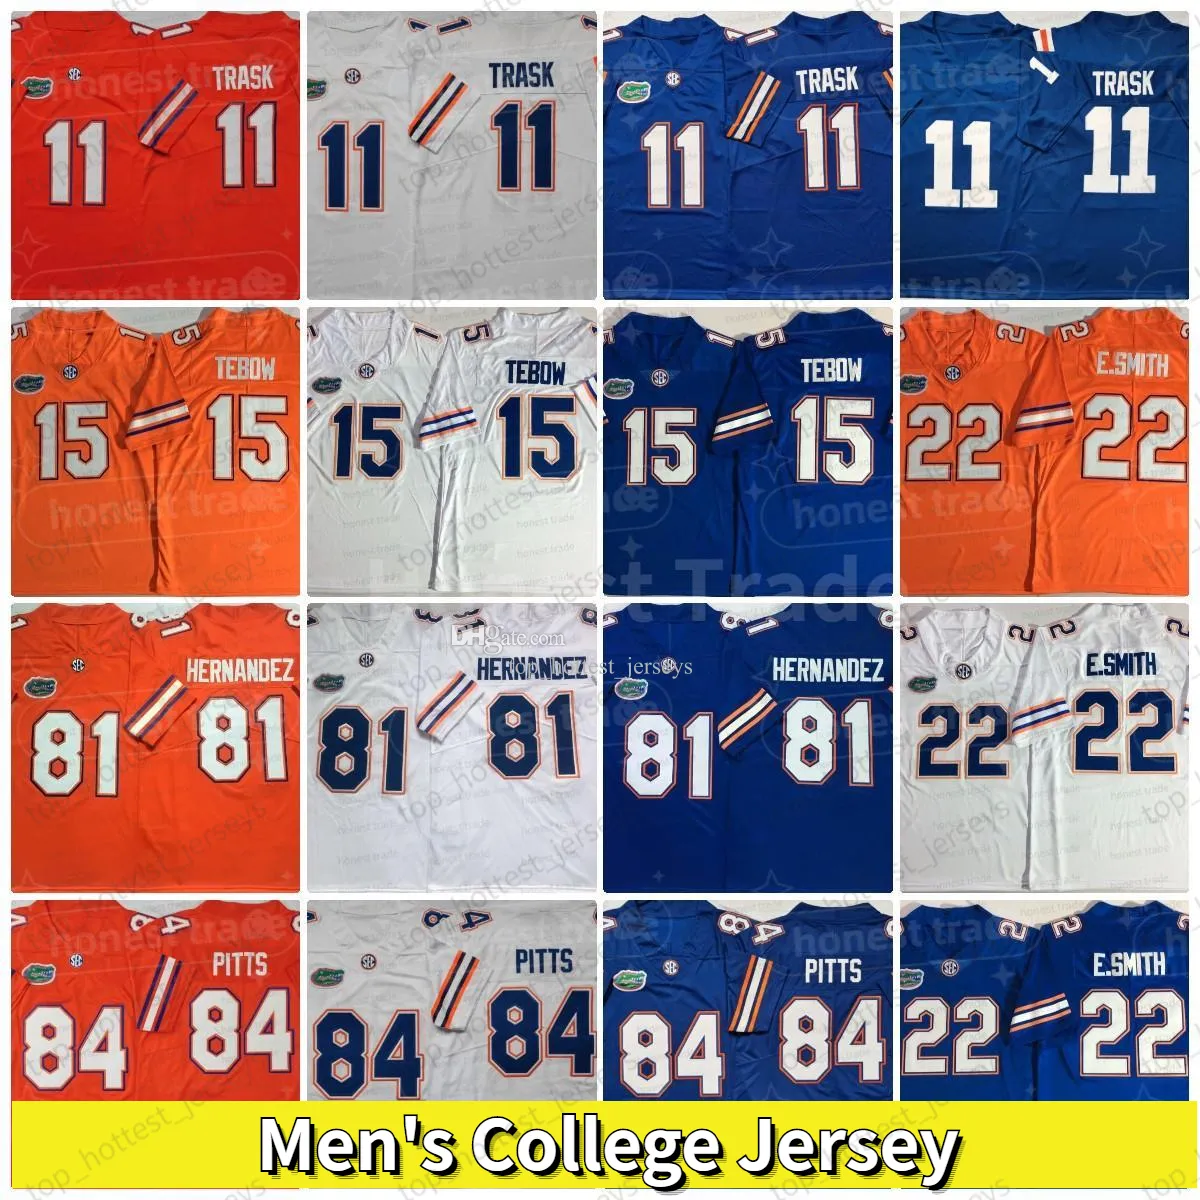 College Florida 15 Tim Tebow Jersey Football 11 Kyle Trask 22 Emmitt Smith E.Smith 81 Aaron Hernandez 84 Pitts All Stitched Jerseys University